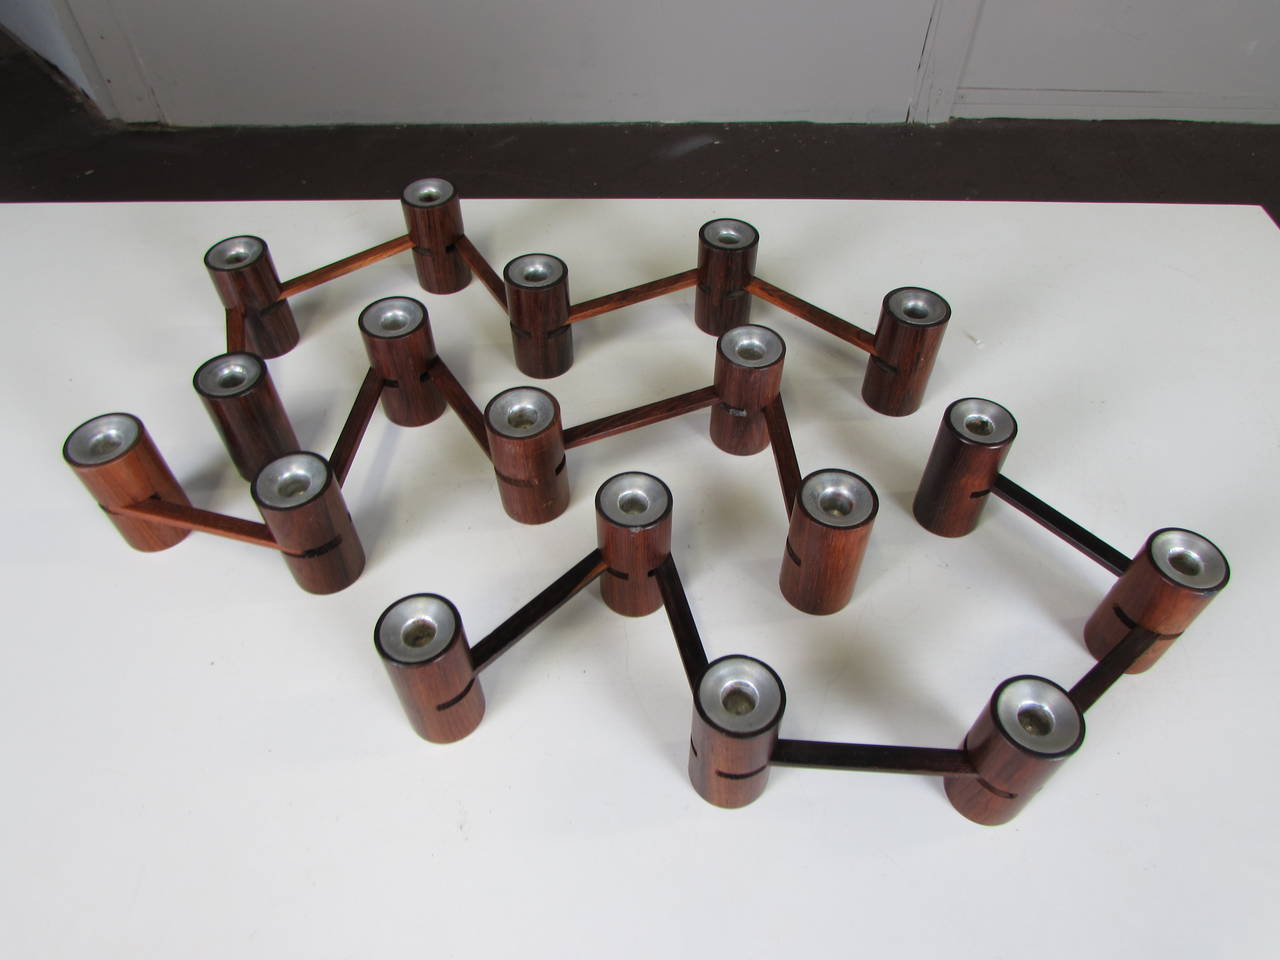 Three Rosewood and Aluminum Articulated Candleholders by Laurs Jensen, Denmark 1